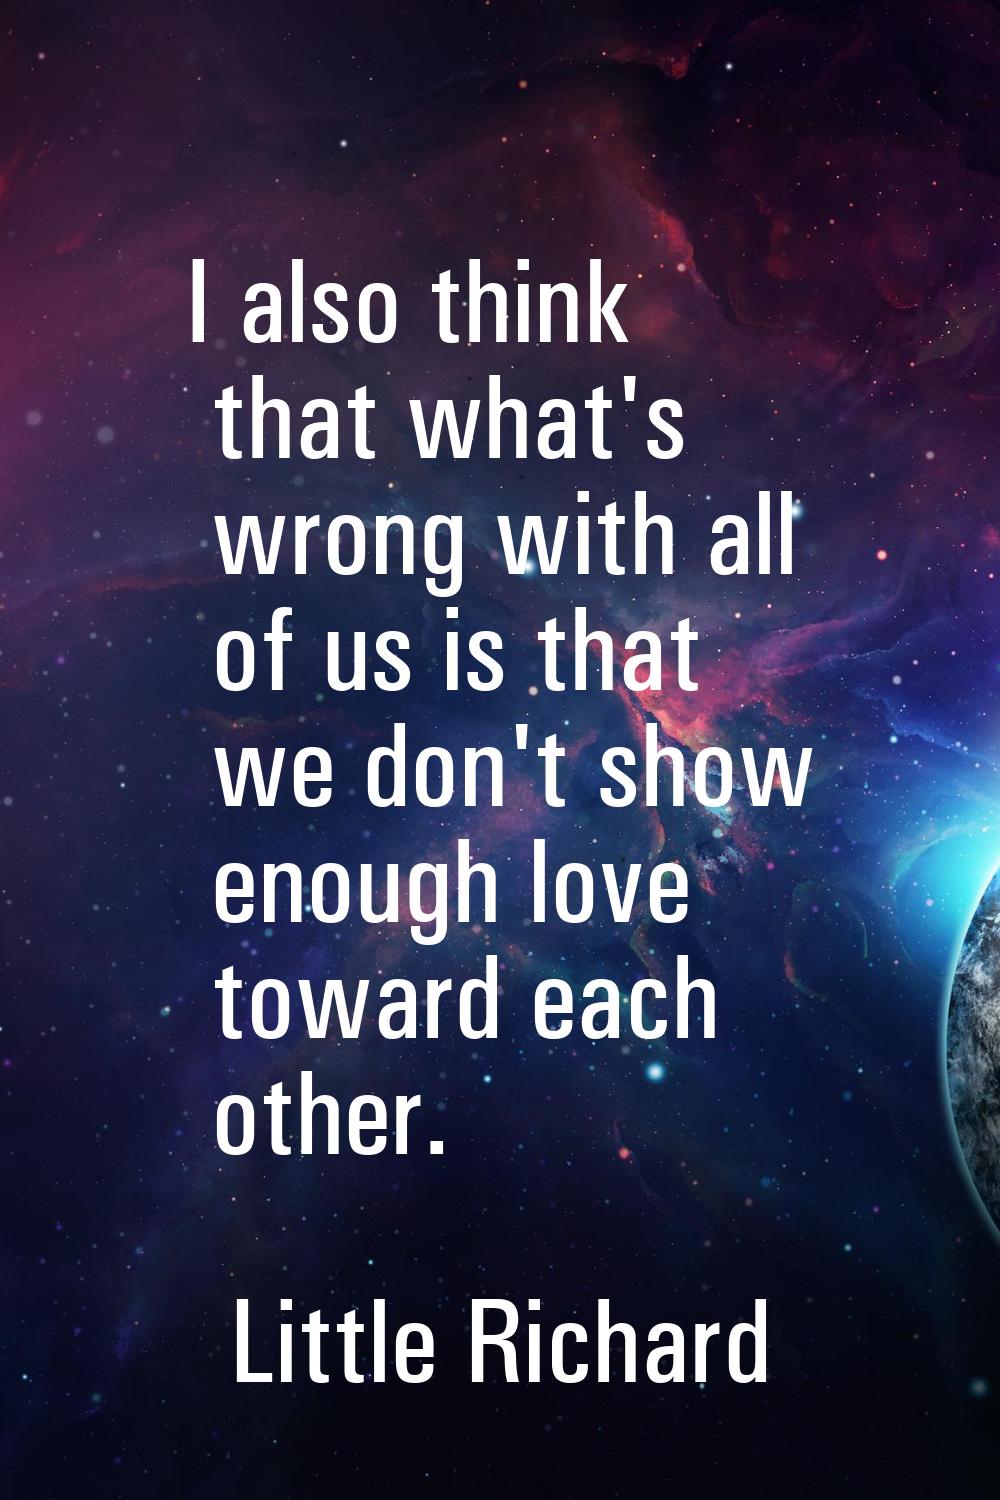 I also think that what's wrong with all of us is that we don't show enough love toward each other.